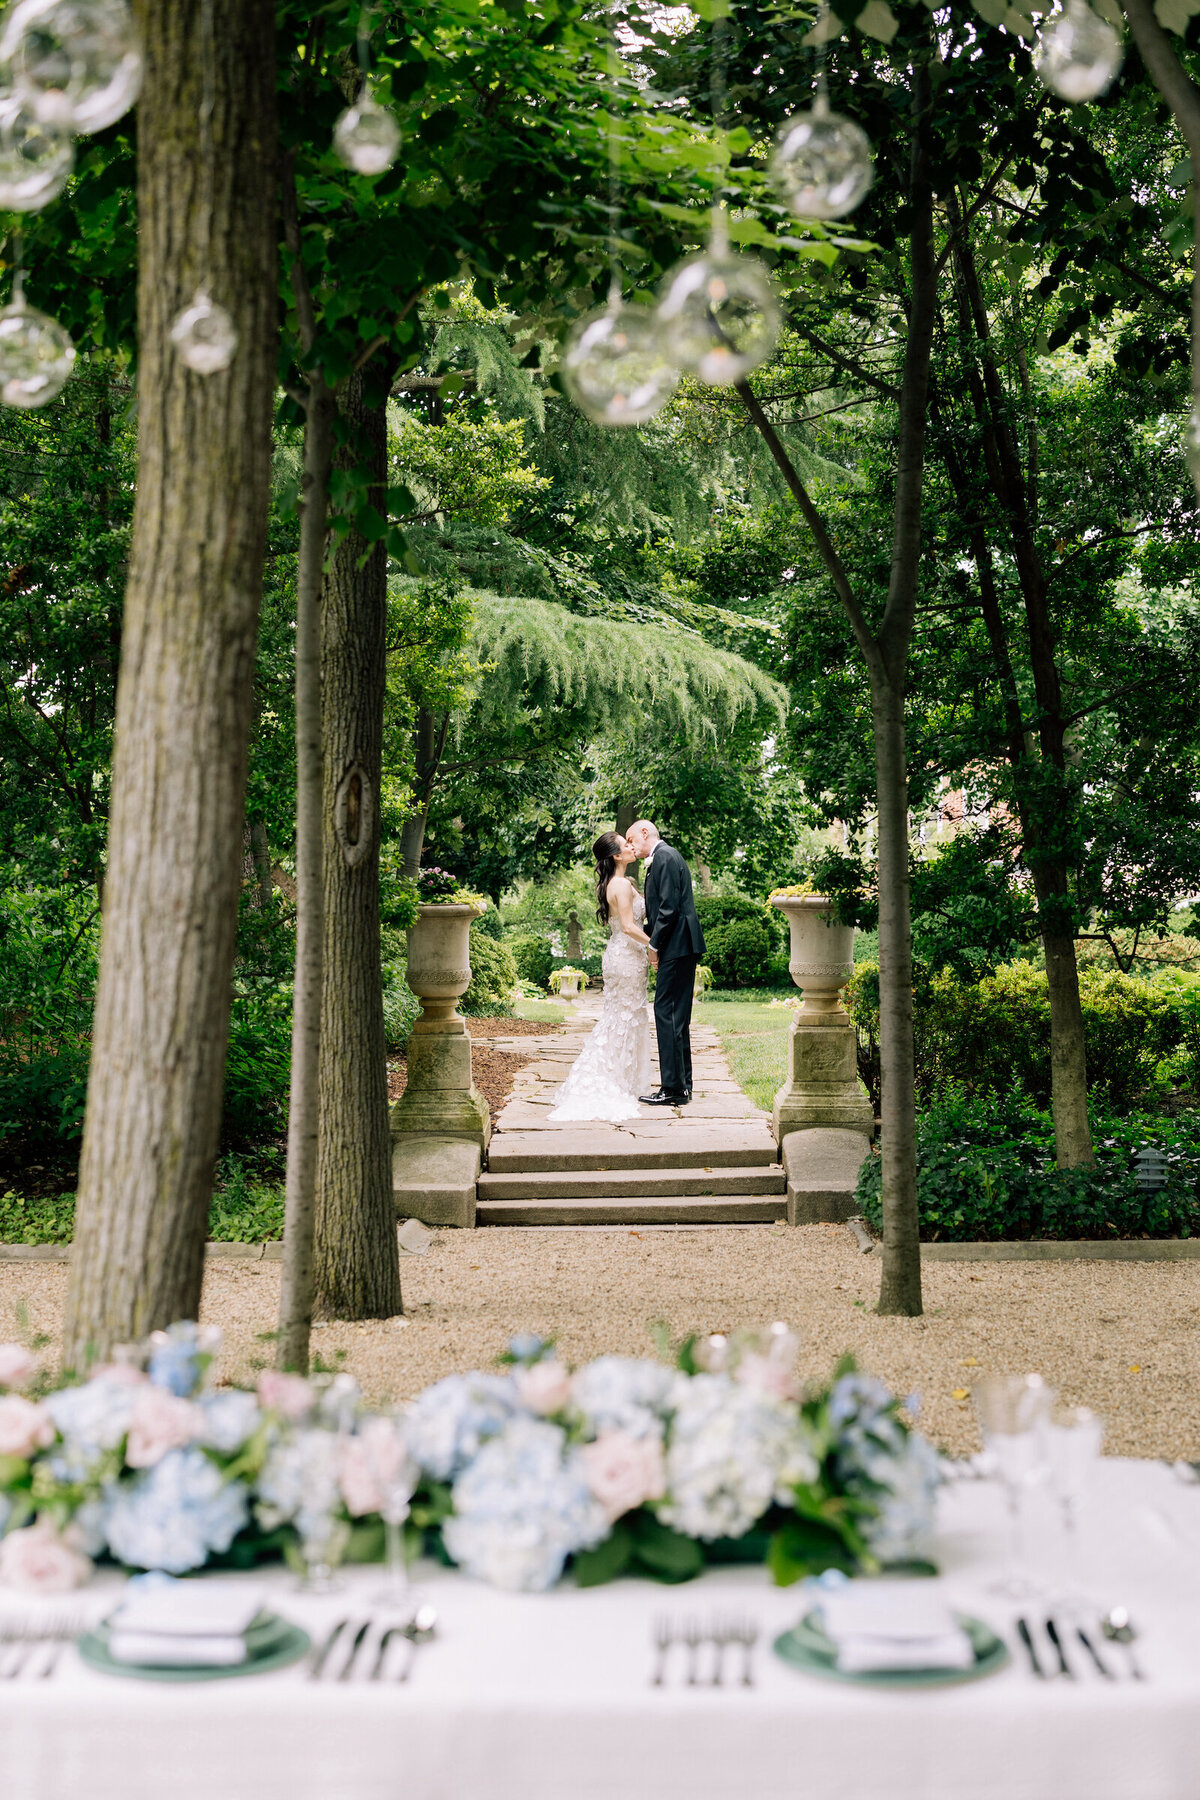 agriffin-events-dc-meridian-wedding-planner-eric-kelley-72